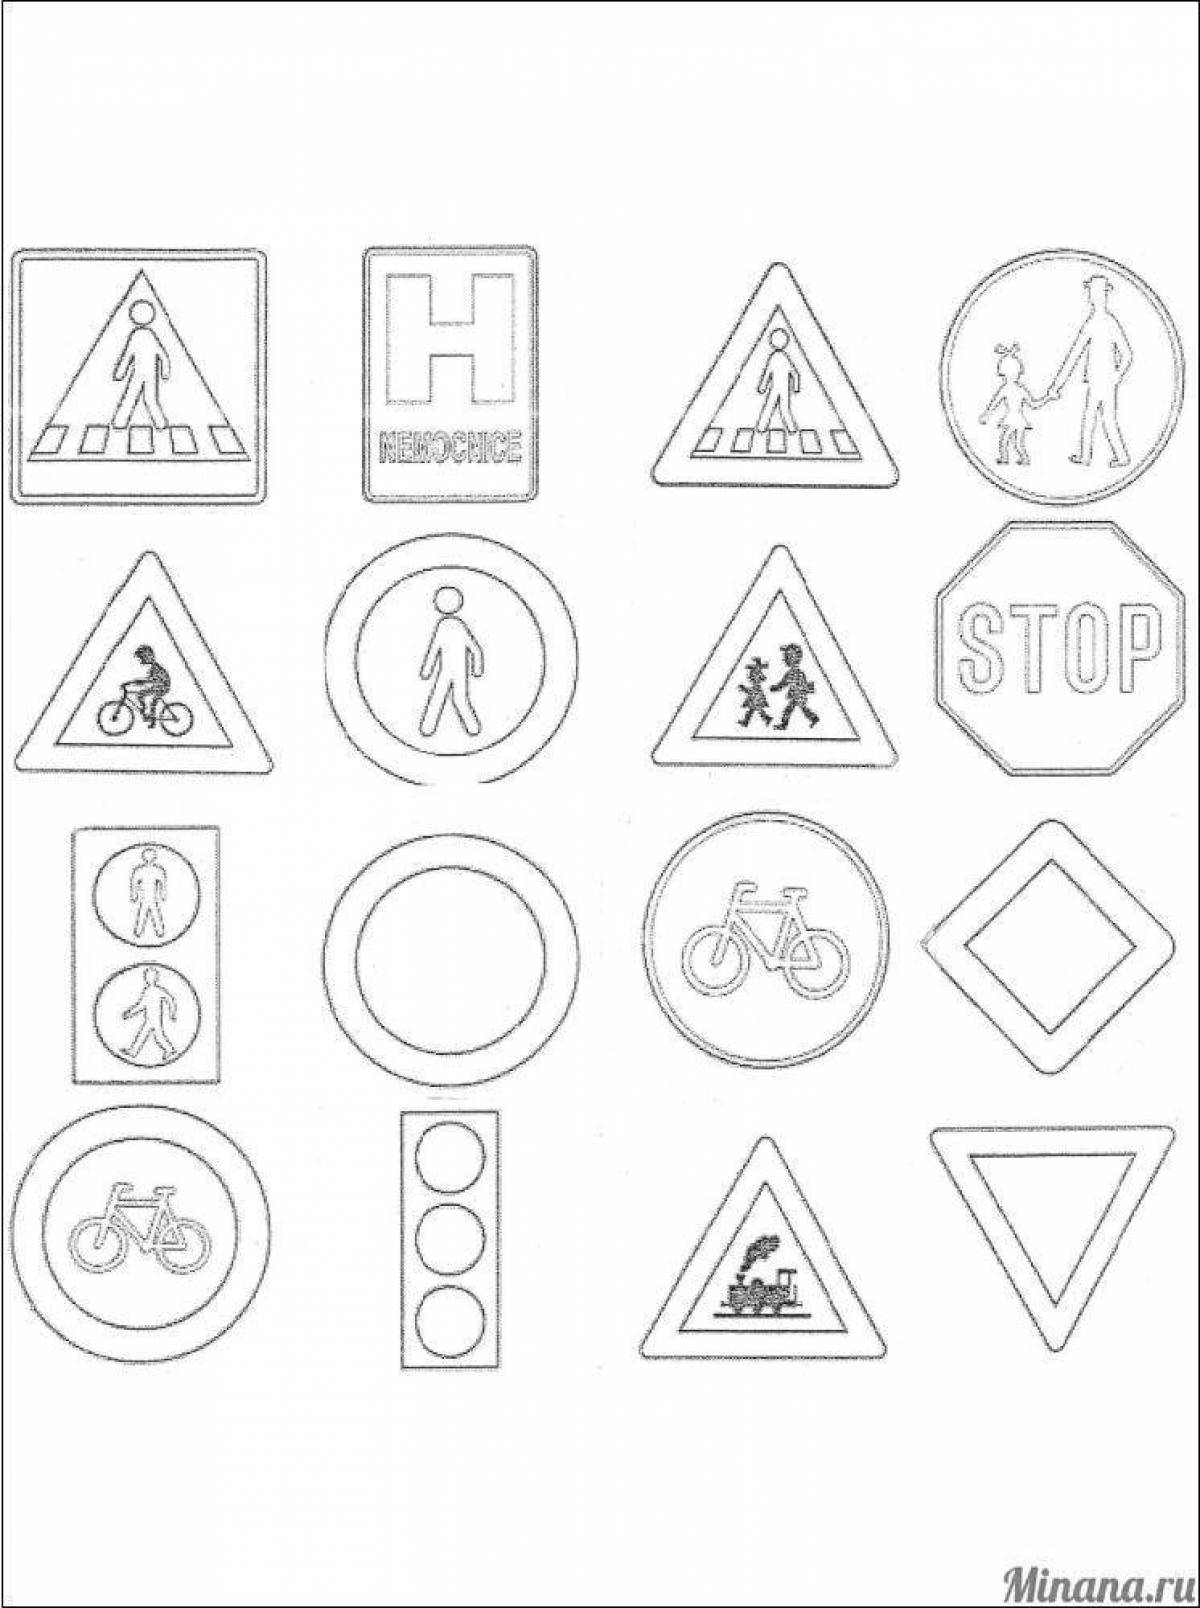 Road signs for children 5 6 years old #9